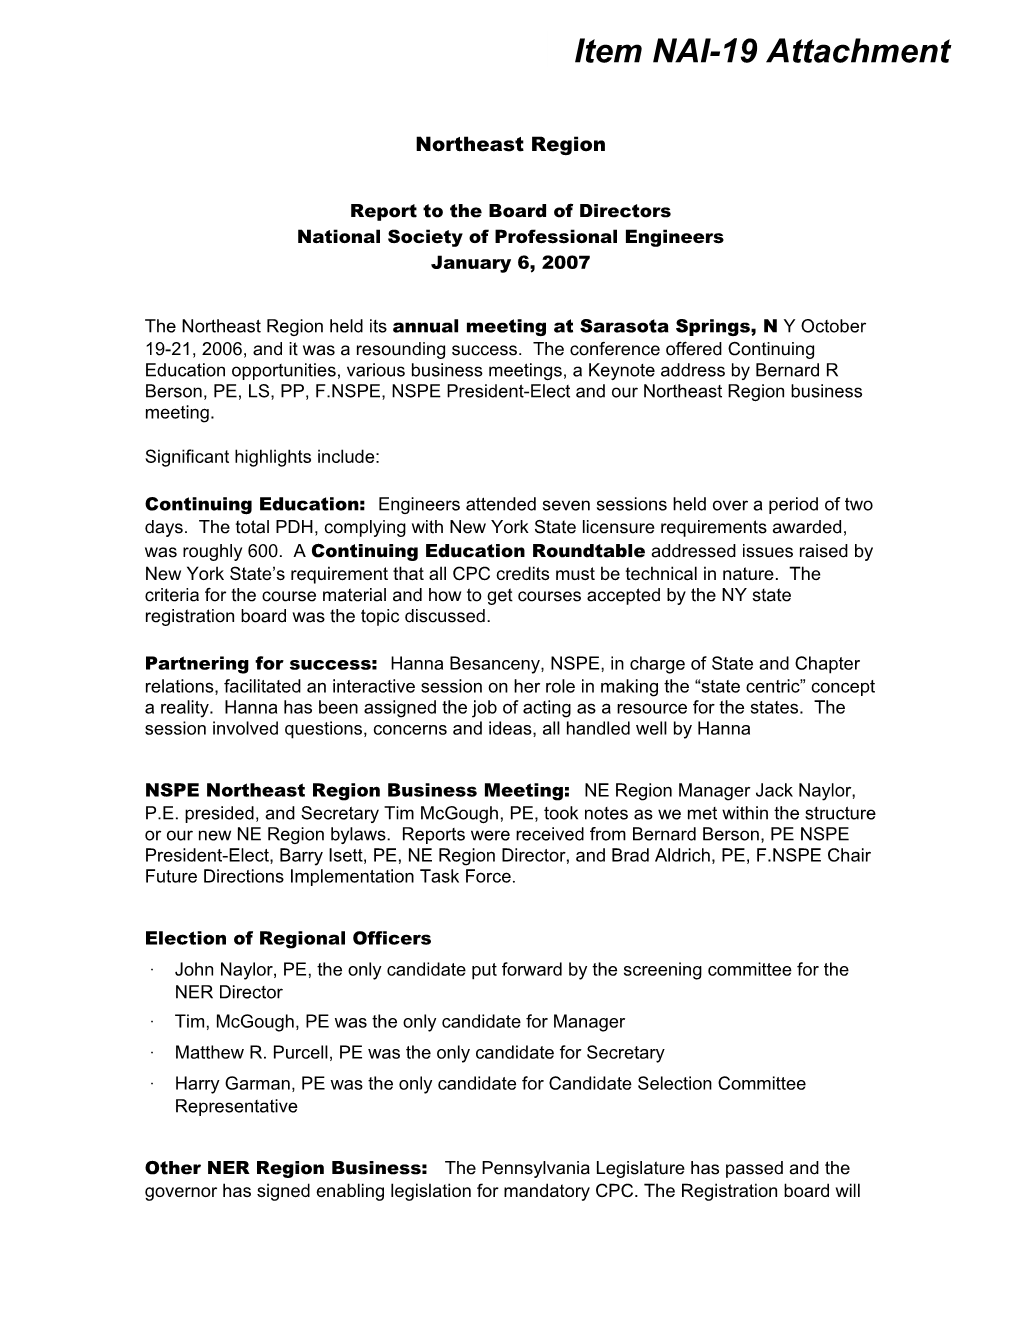 Report to the Board of Directors